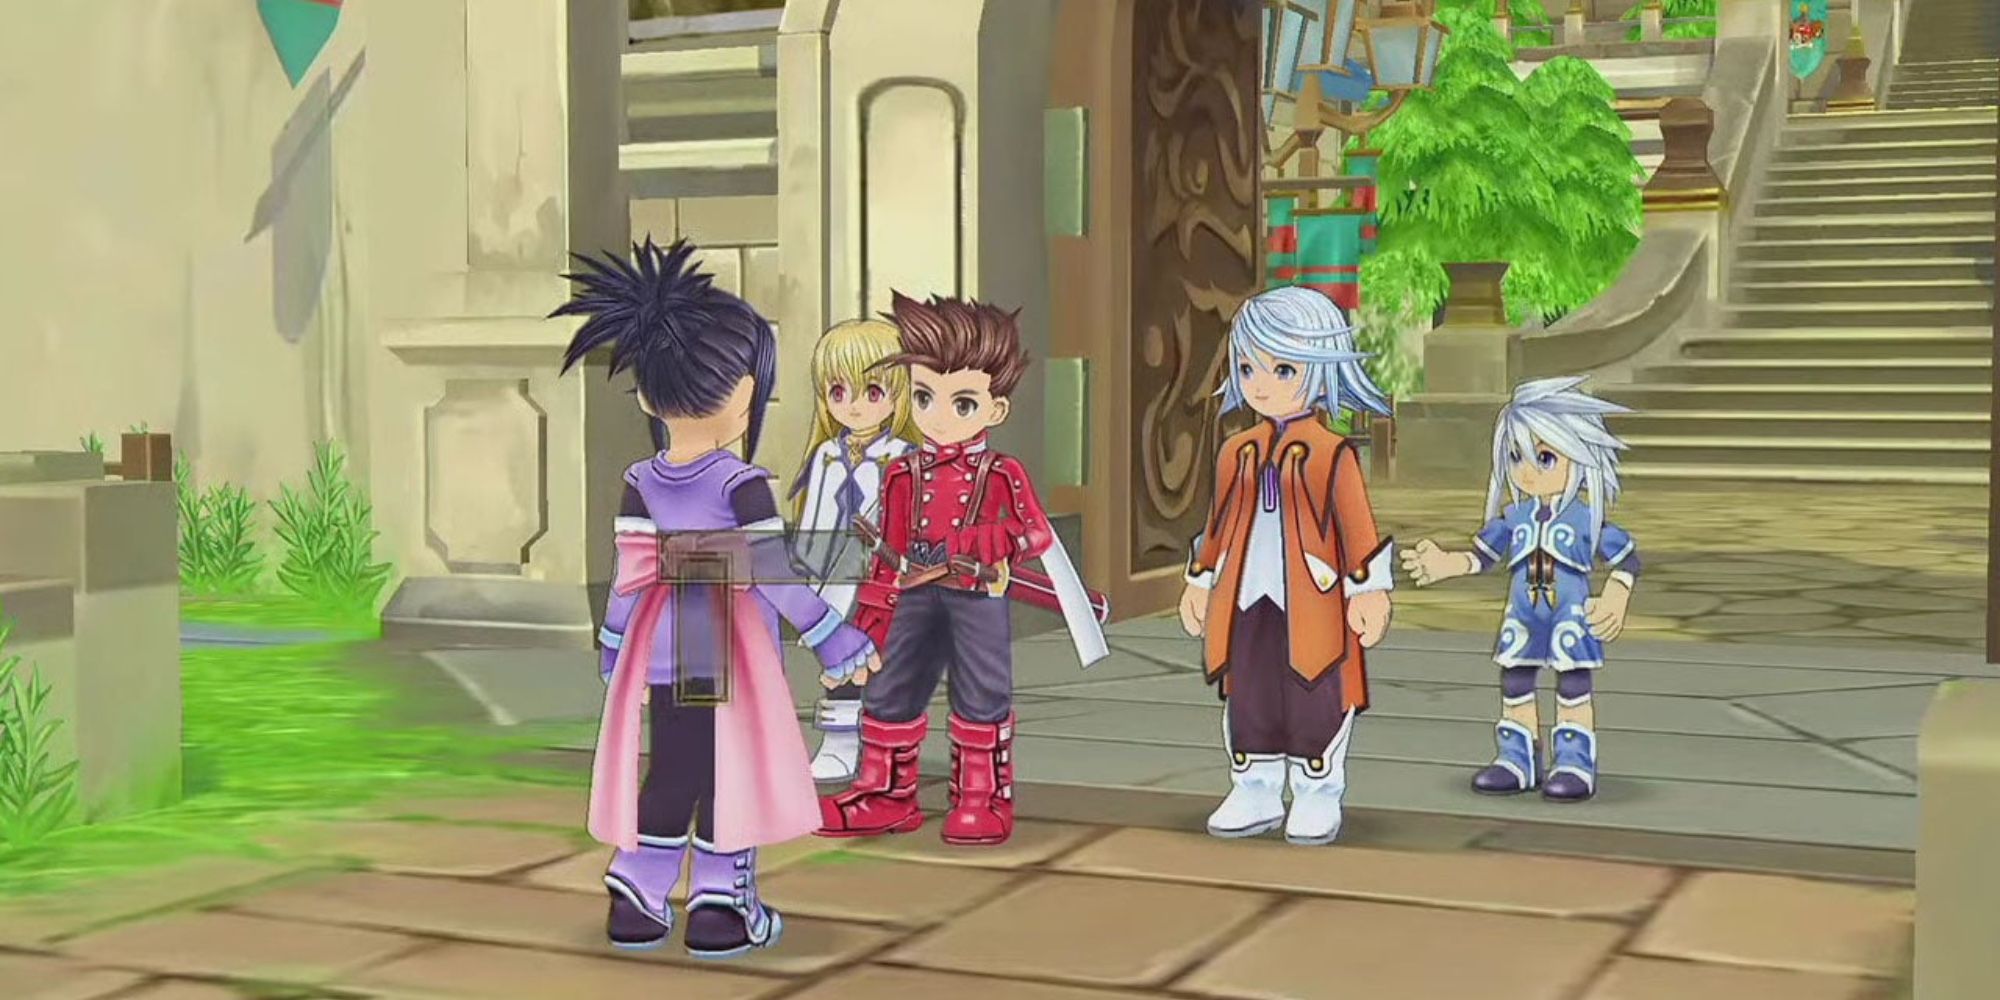 Tales of Symphonia party members in a conversation